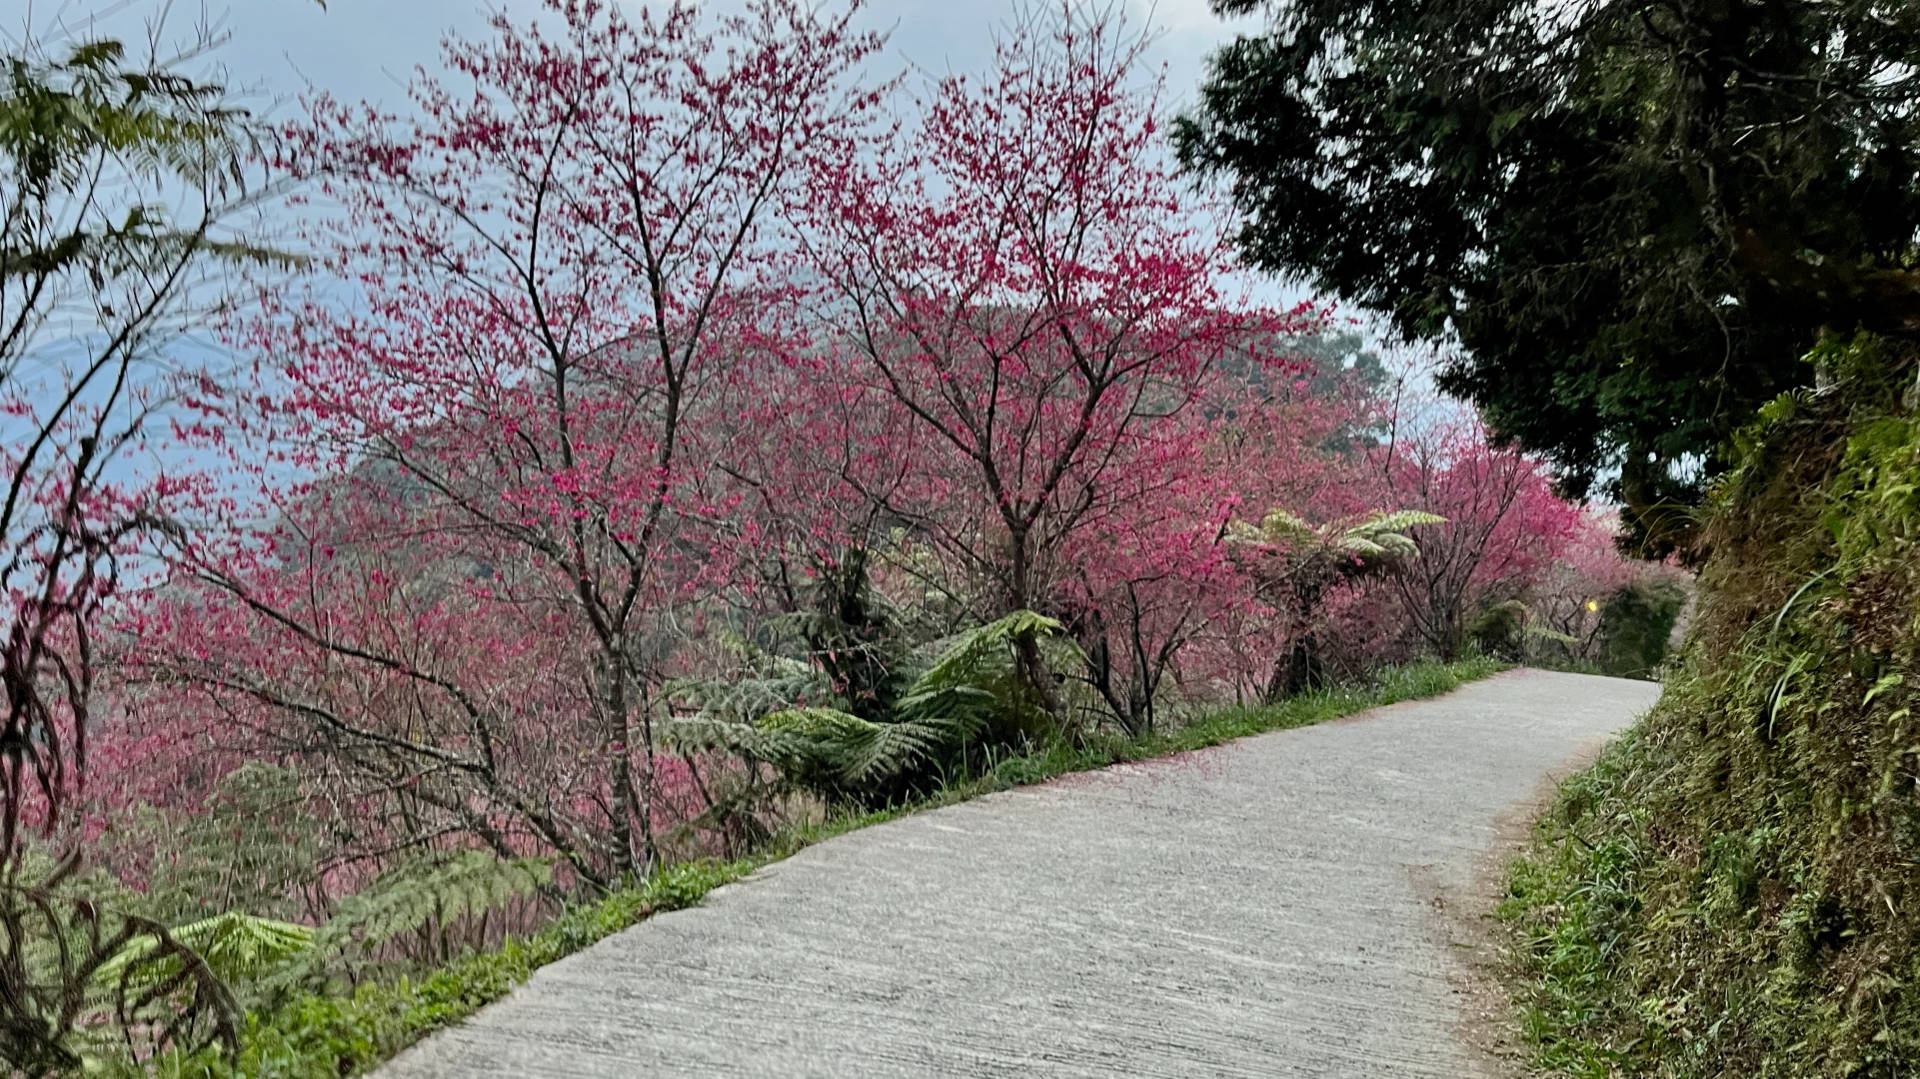 A concrete path winding down the hill, with ferns and cherry blossom on the downward slope to the left.